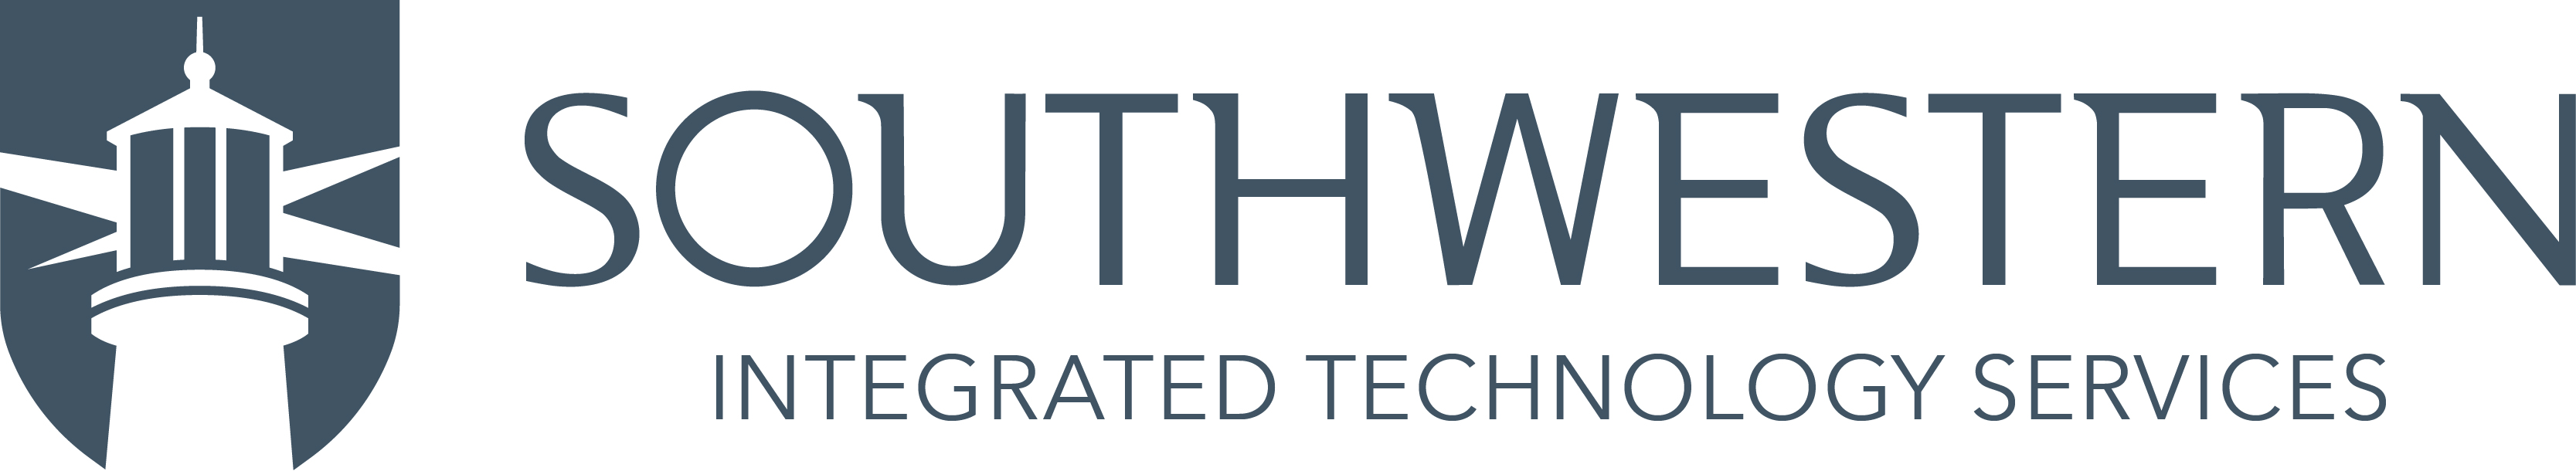 Southwestern Integrated Technology Services 